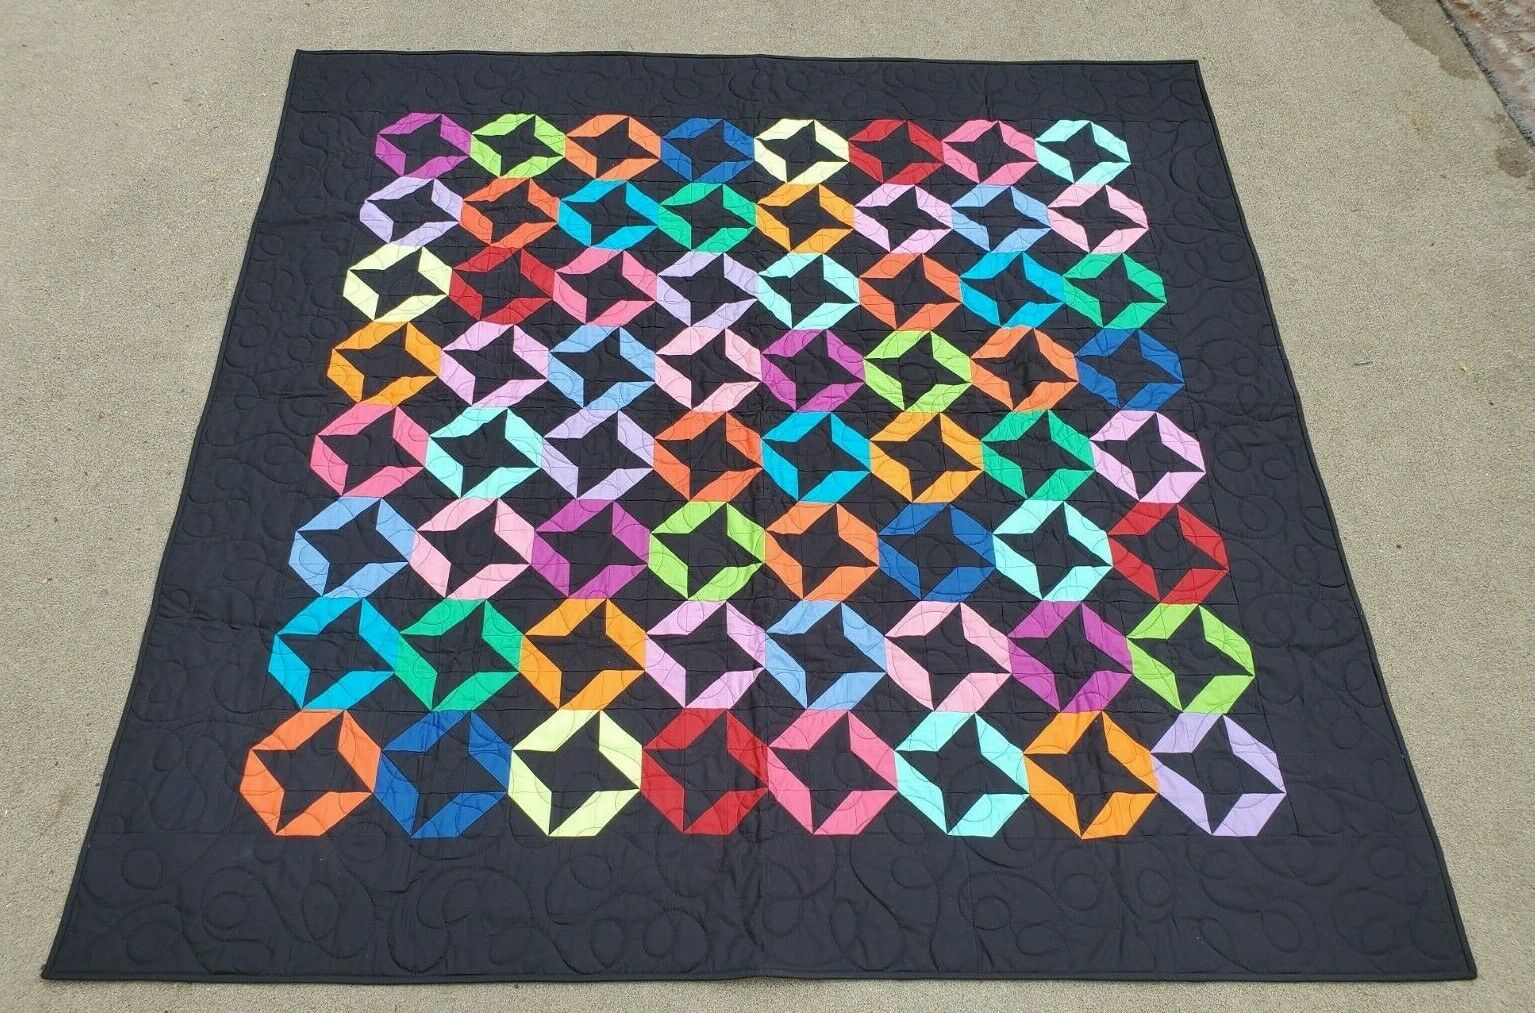 New~black-9-patch Rainbow Stars Colorful Patchwork Quilt Lap/throw 60x60 Vibrant